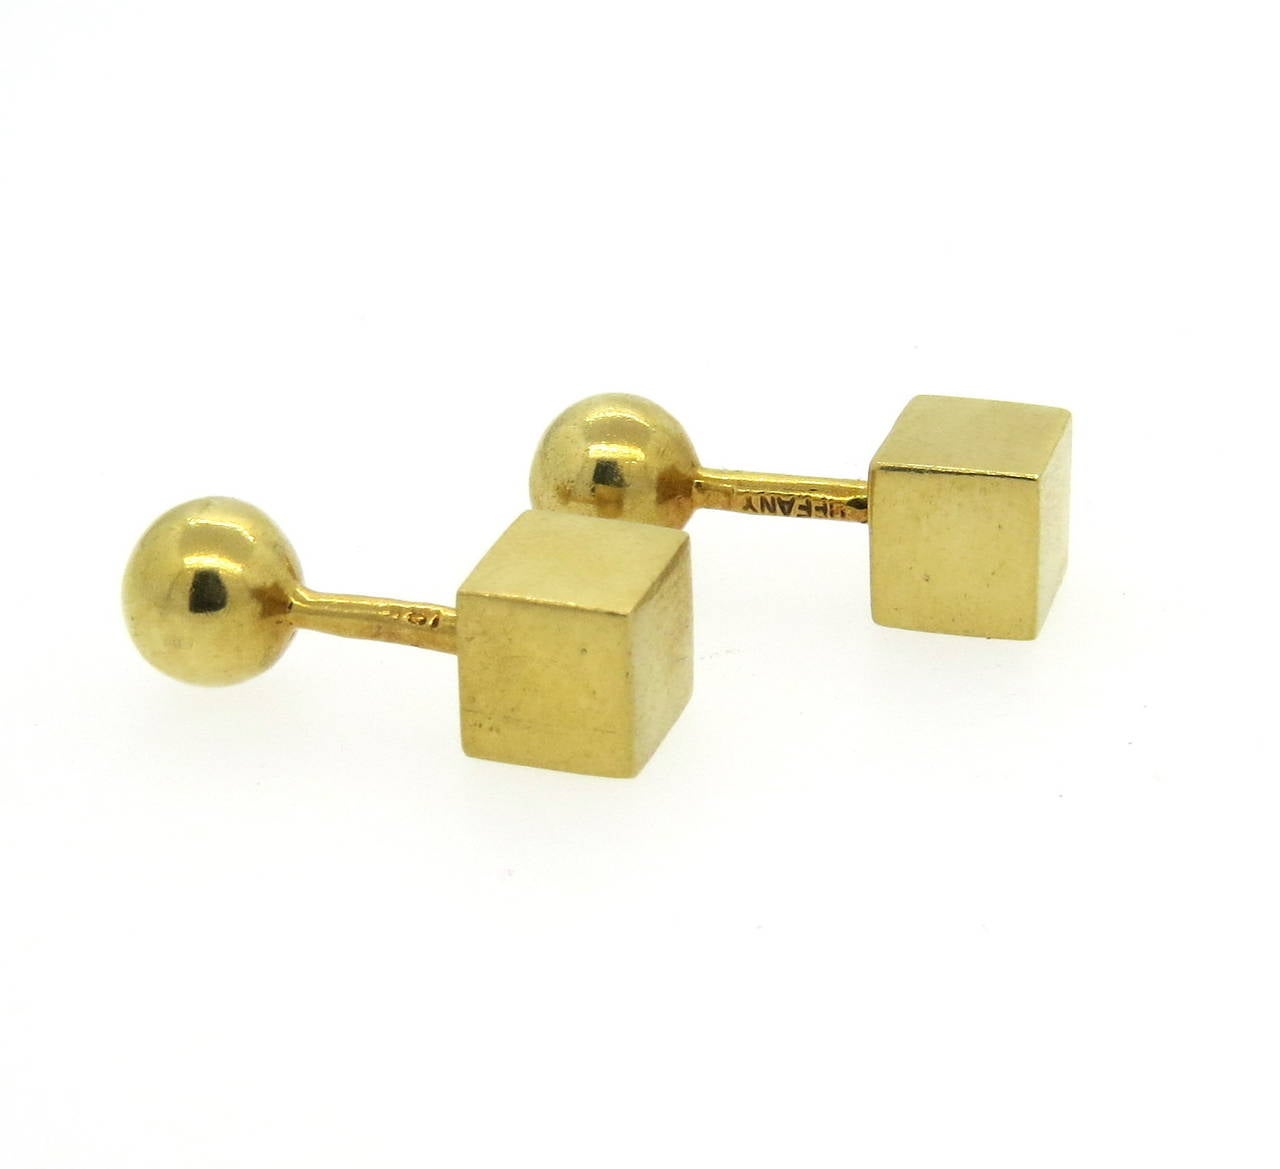 Tiffany & Co 18k gold geometric design cufflinks, deaturing one ball end and one cube. Ball measures 9.2mm in diameter, cube - 9mm x 9mm. Marked Tiffany, 18k. Weight - 20.6 grams